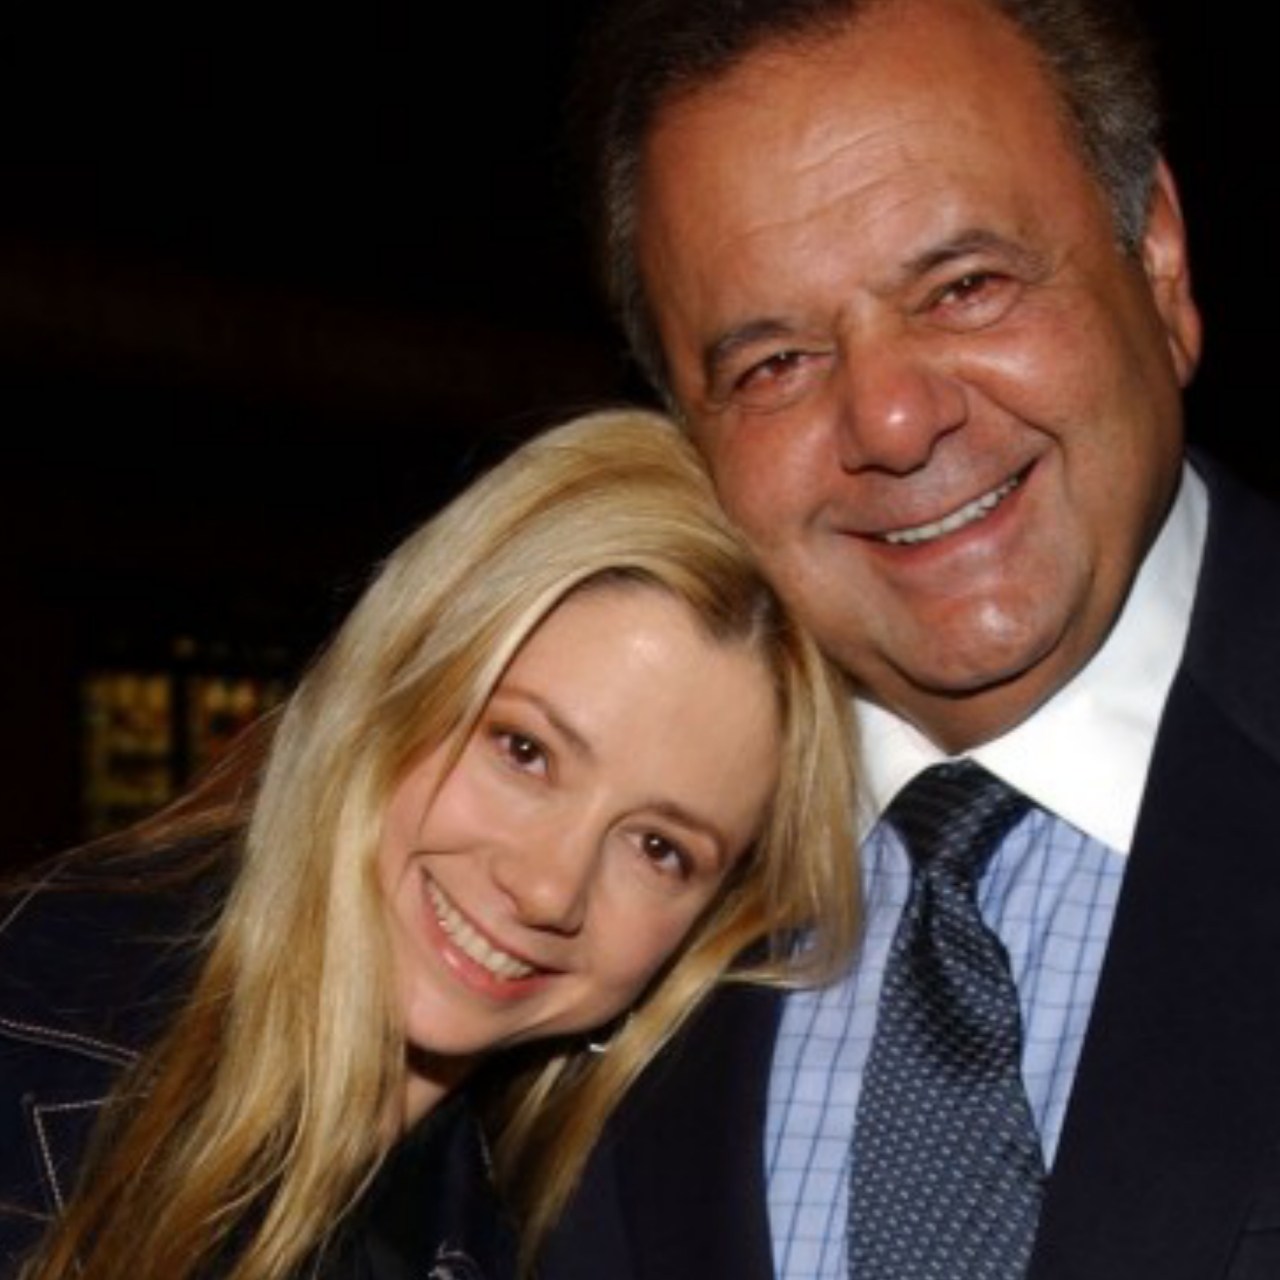 Mira Sorvino Pays Tribute To Father Paul Sorvino My Heart Is Rent Asunder